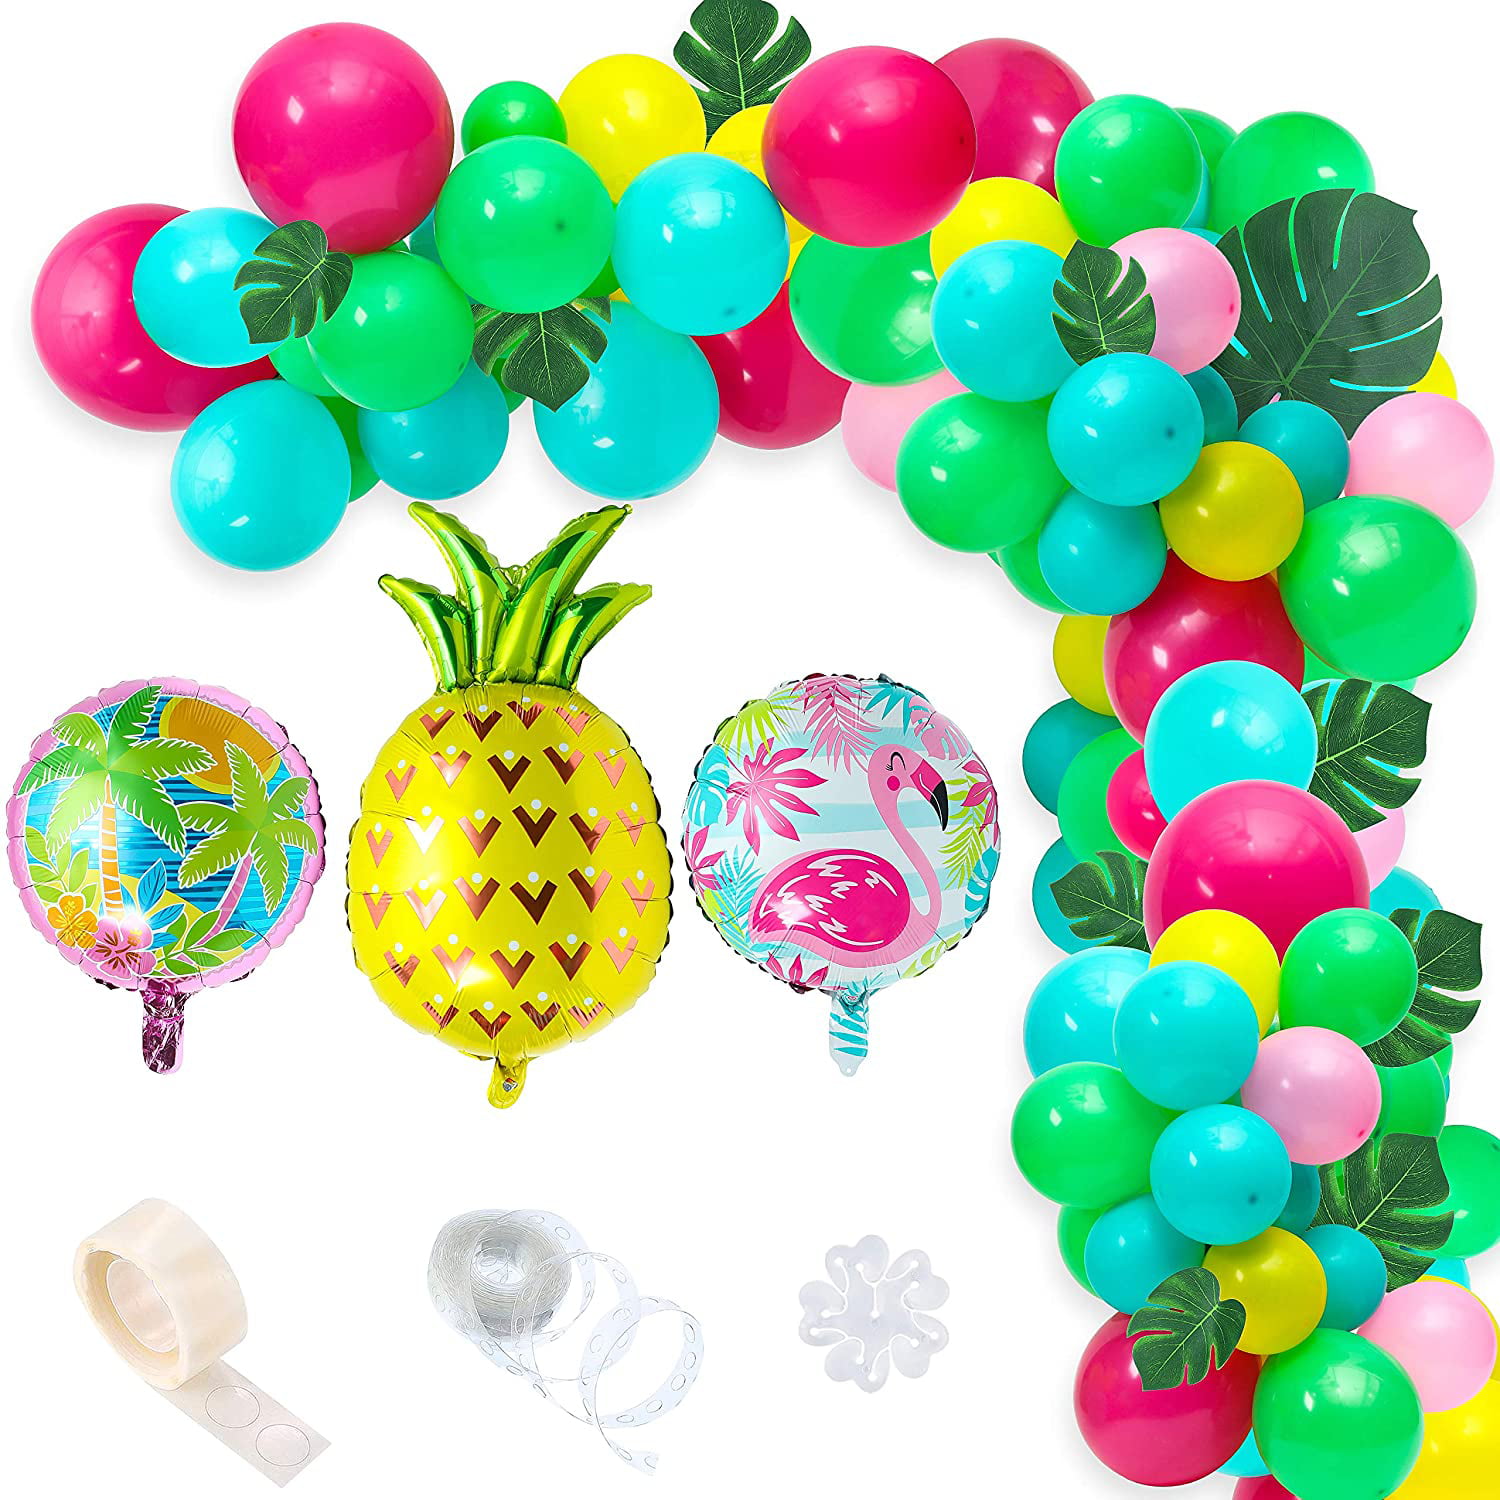 SATINIOR Set of 45 Hawaii Party Balloon Flamingo Tropical Leaf Pineapple Balloons Colorful Balloon with Round Confetti for Hawaii Luau Party Decorations